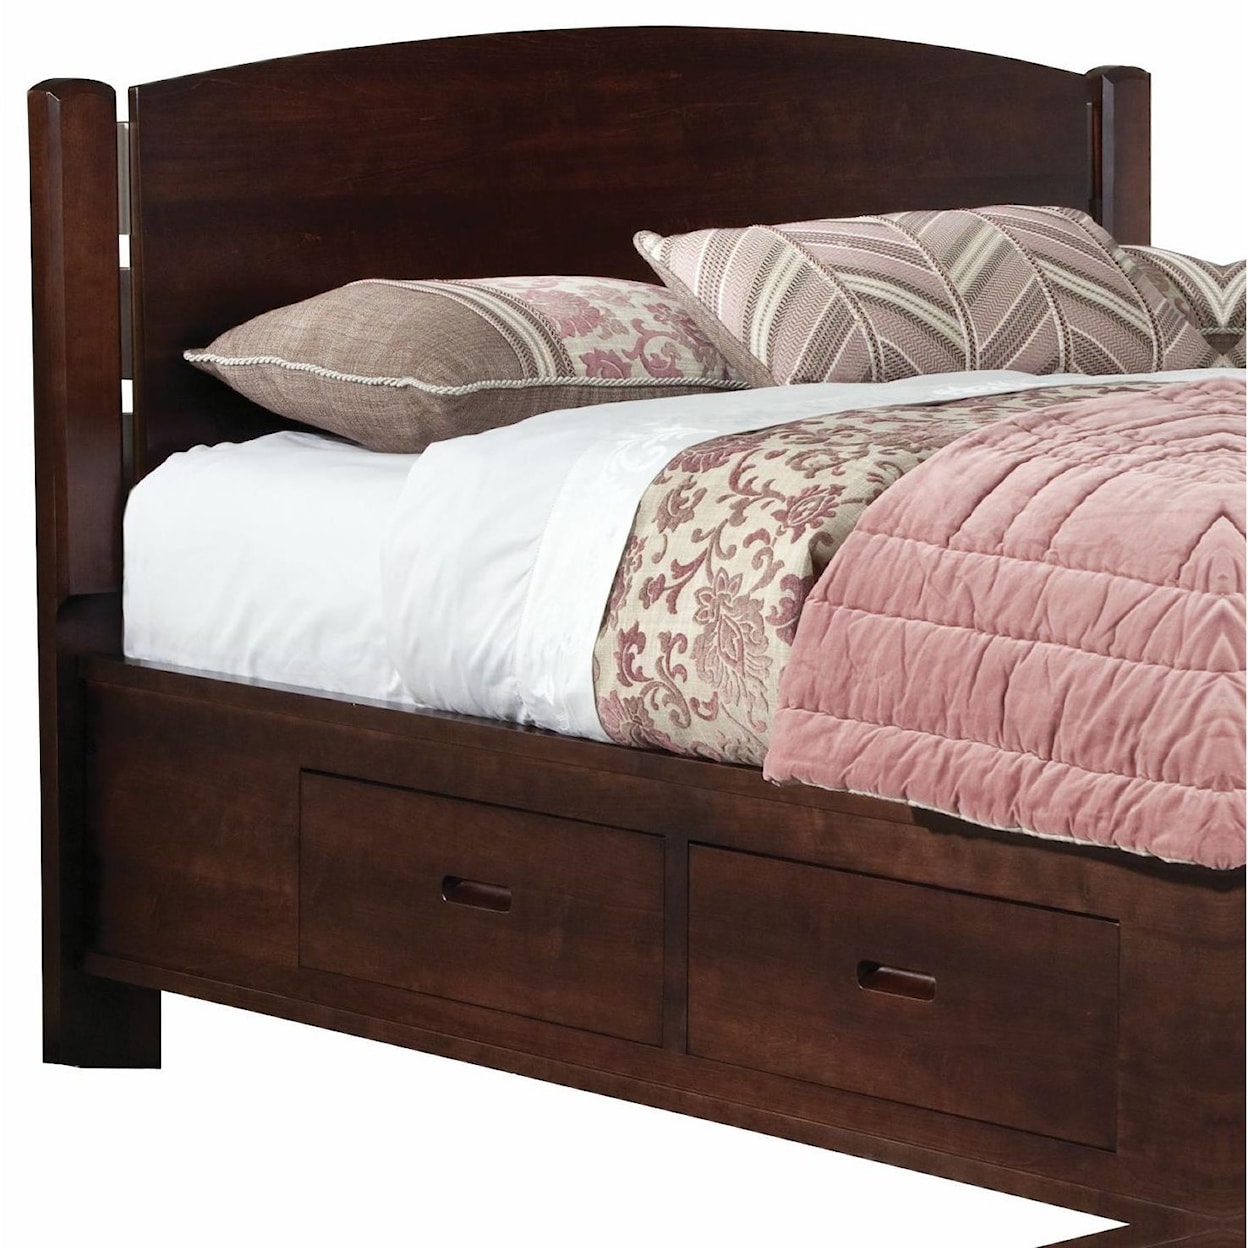 perfectbalance by Durham Furniture Beds Arch Top King Headboard